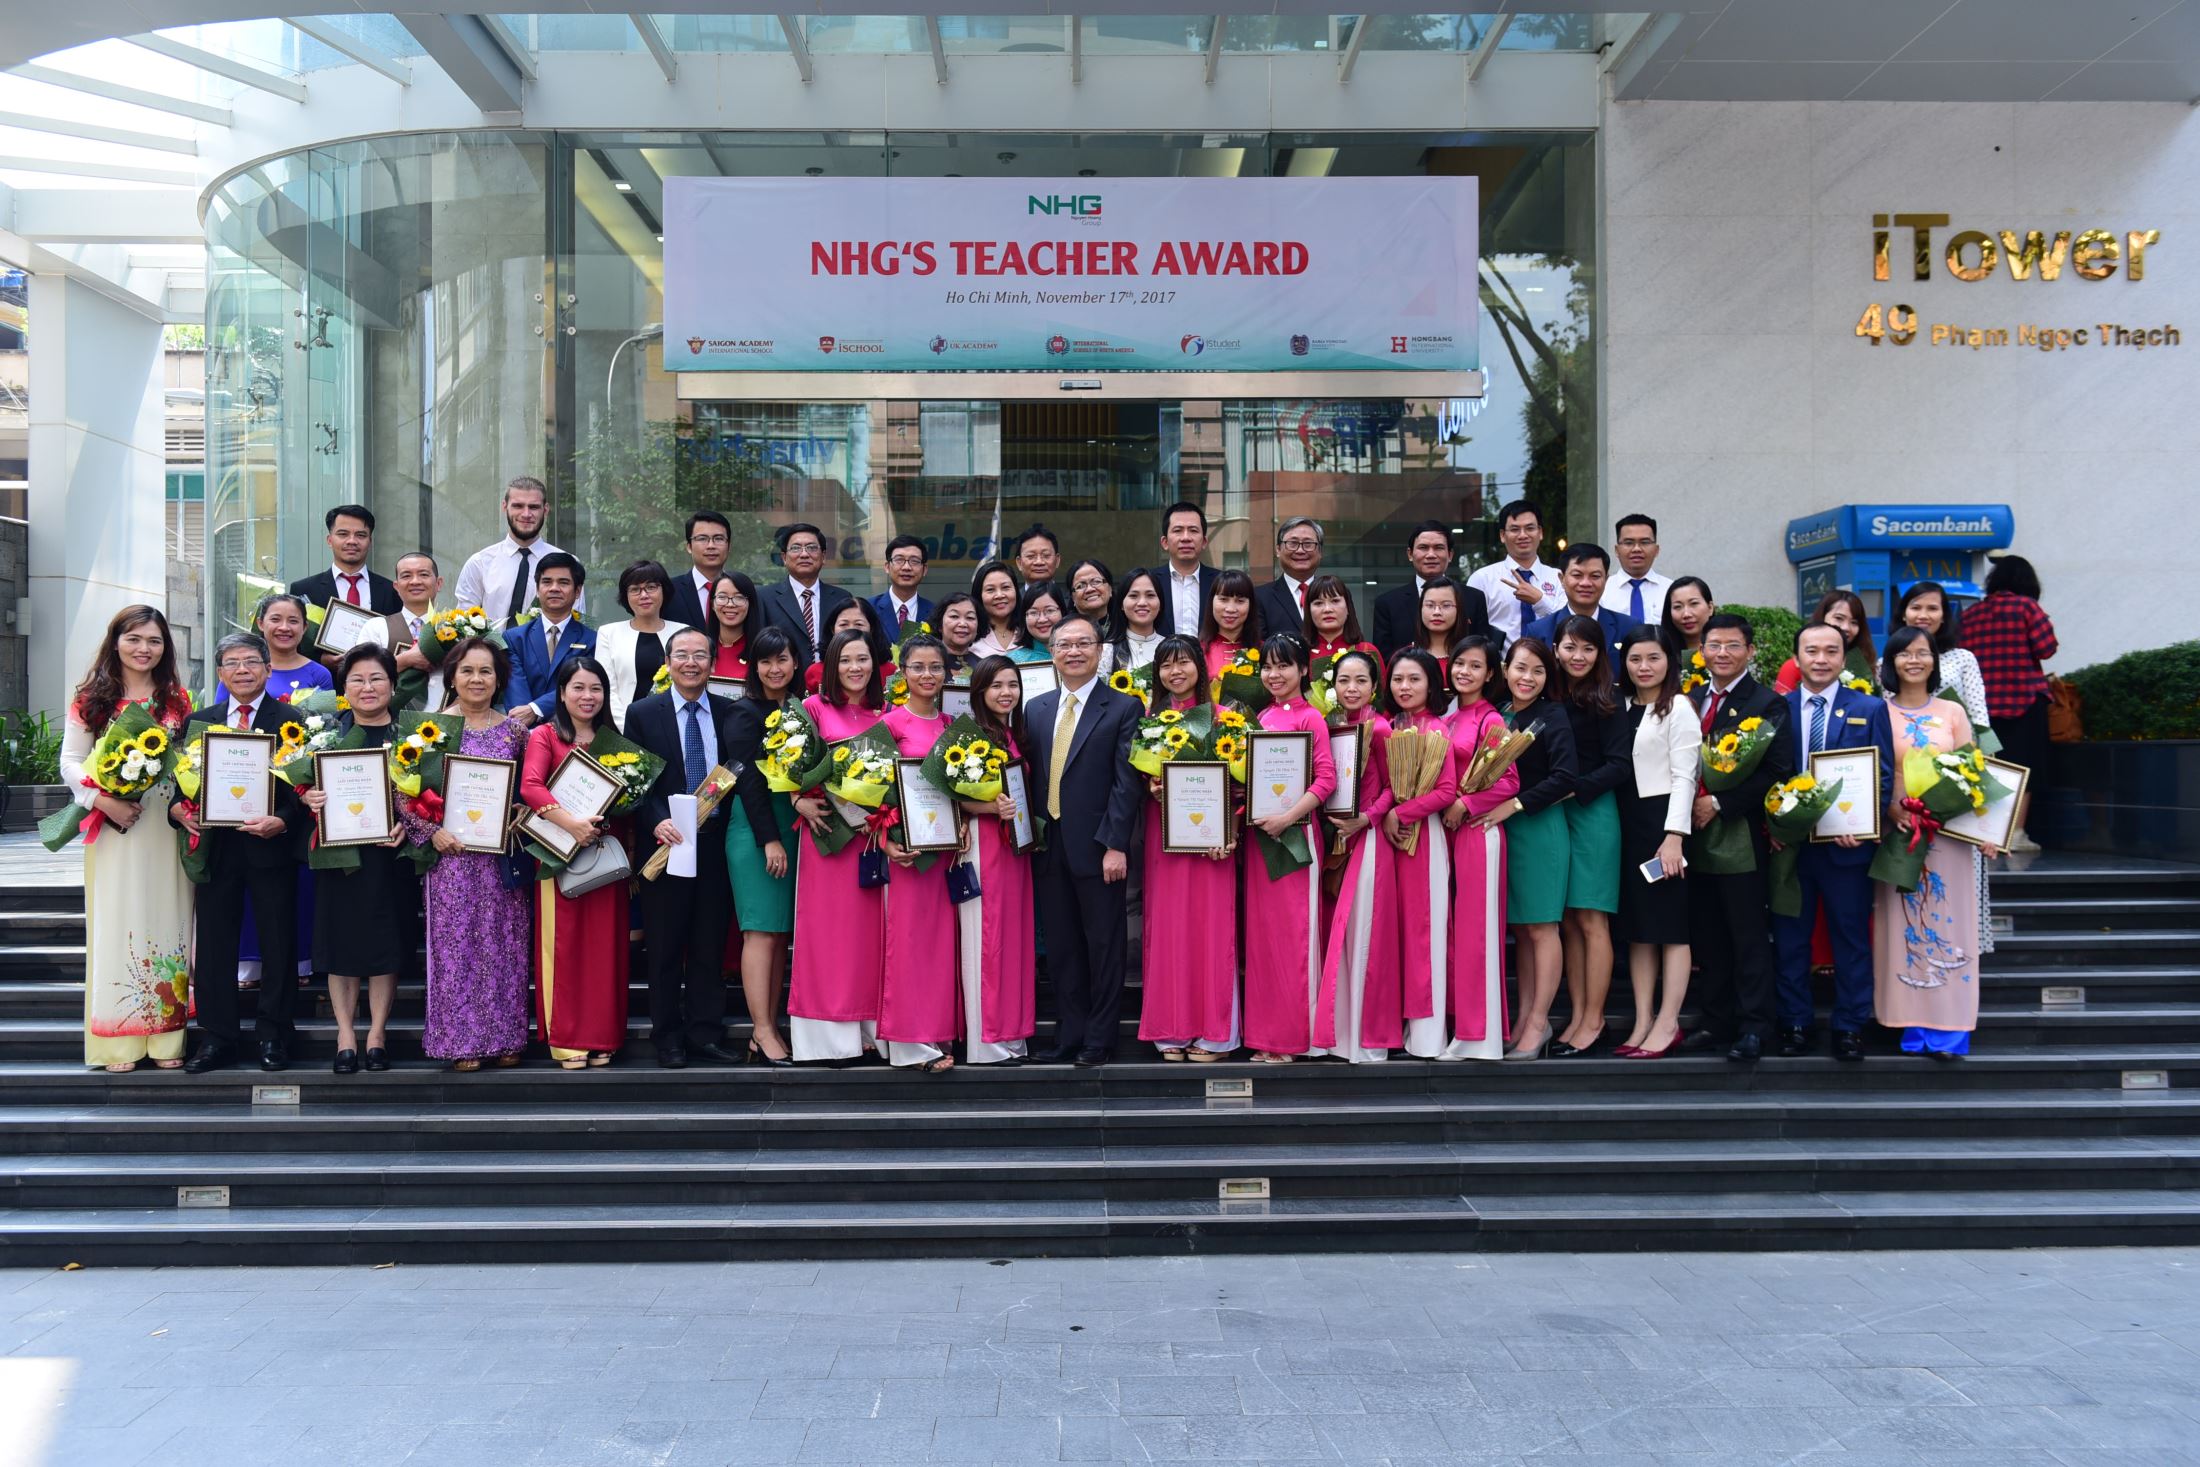 NHG's Board of Directors and all the teachers at the ceremony